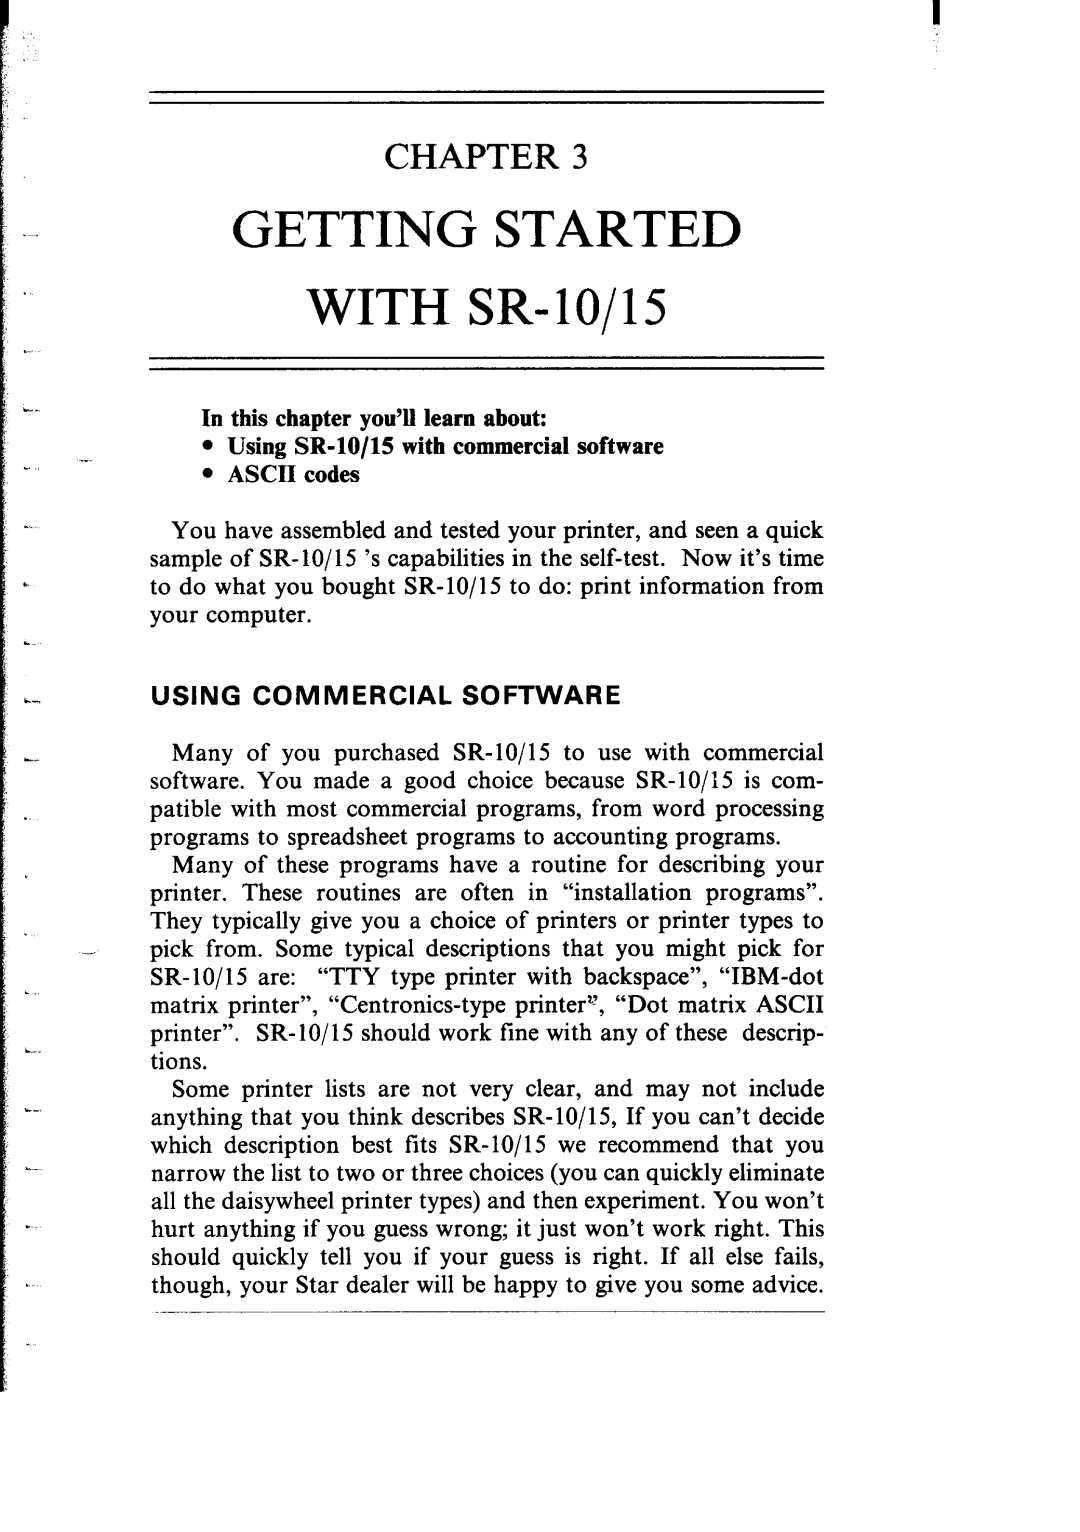 Star Micronics SR-10/I5 user manual GETTING STARTED WITH SR-lo/l5, Chapter, In this chapter you’ll learn about, ASCII codes 